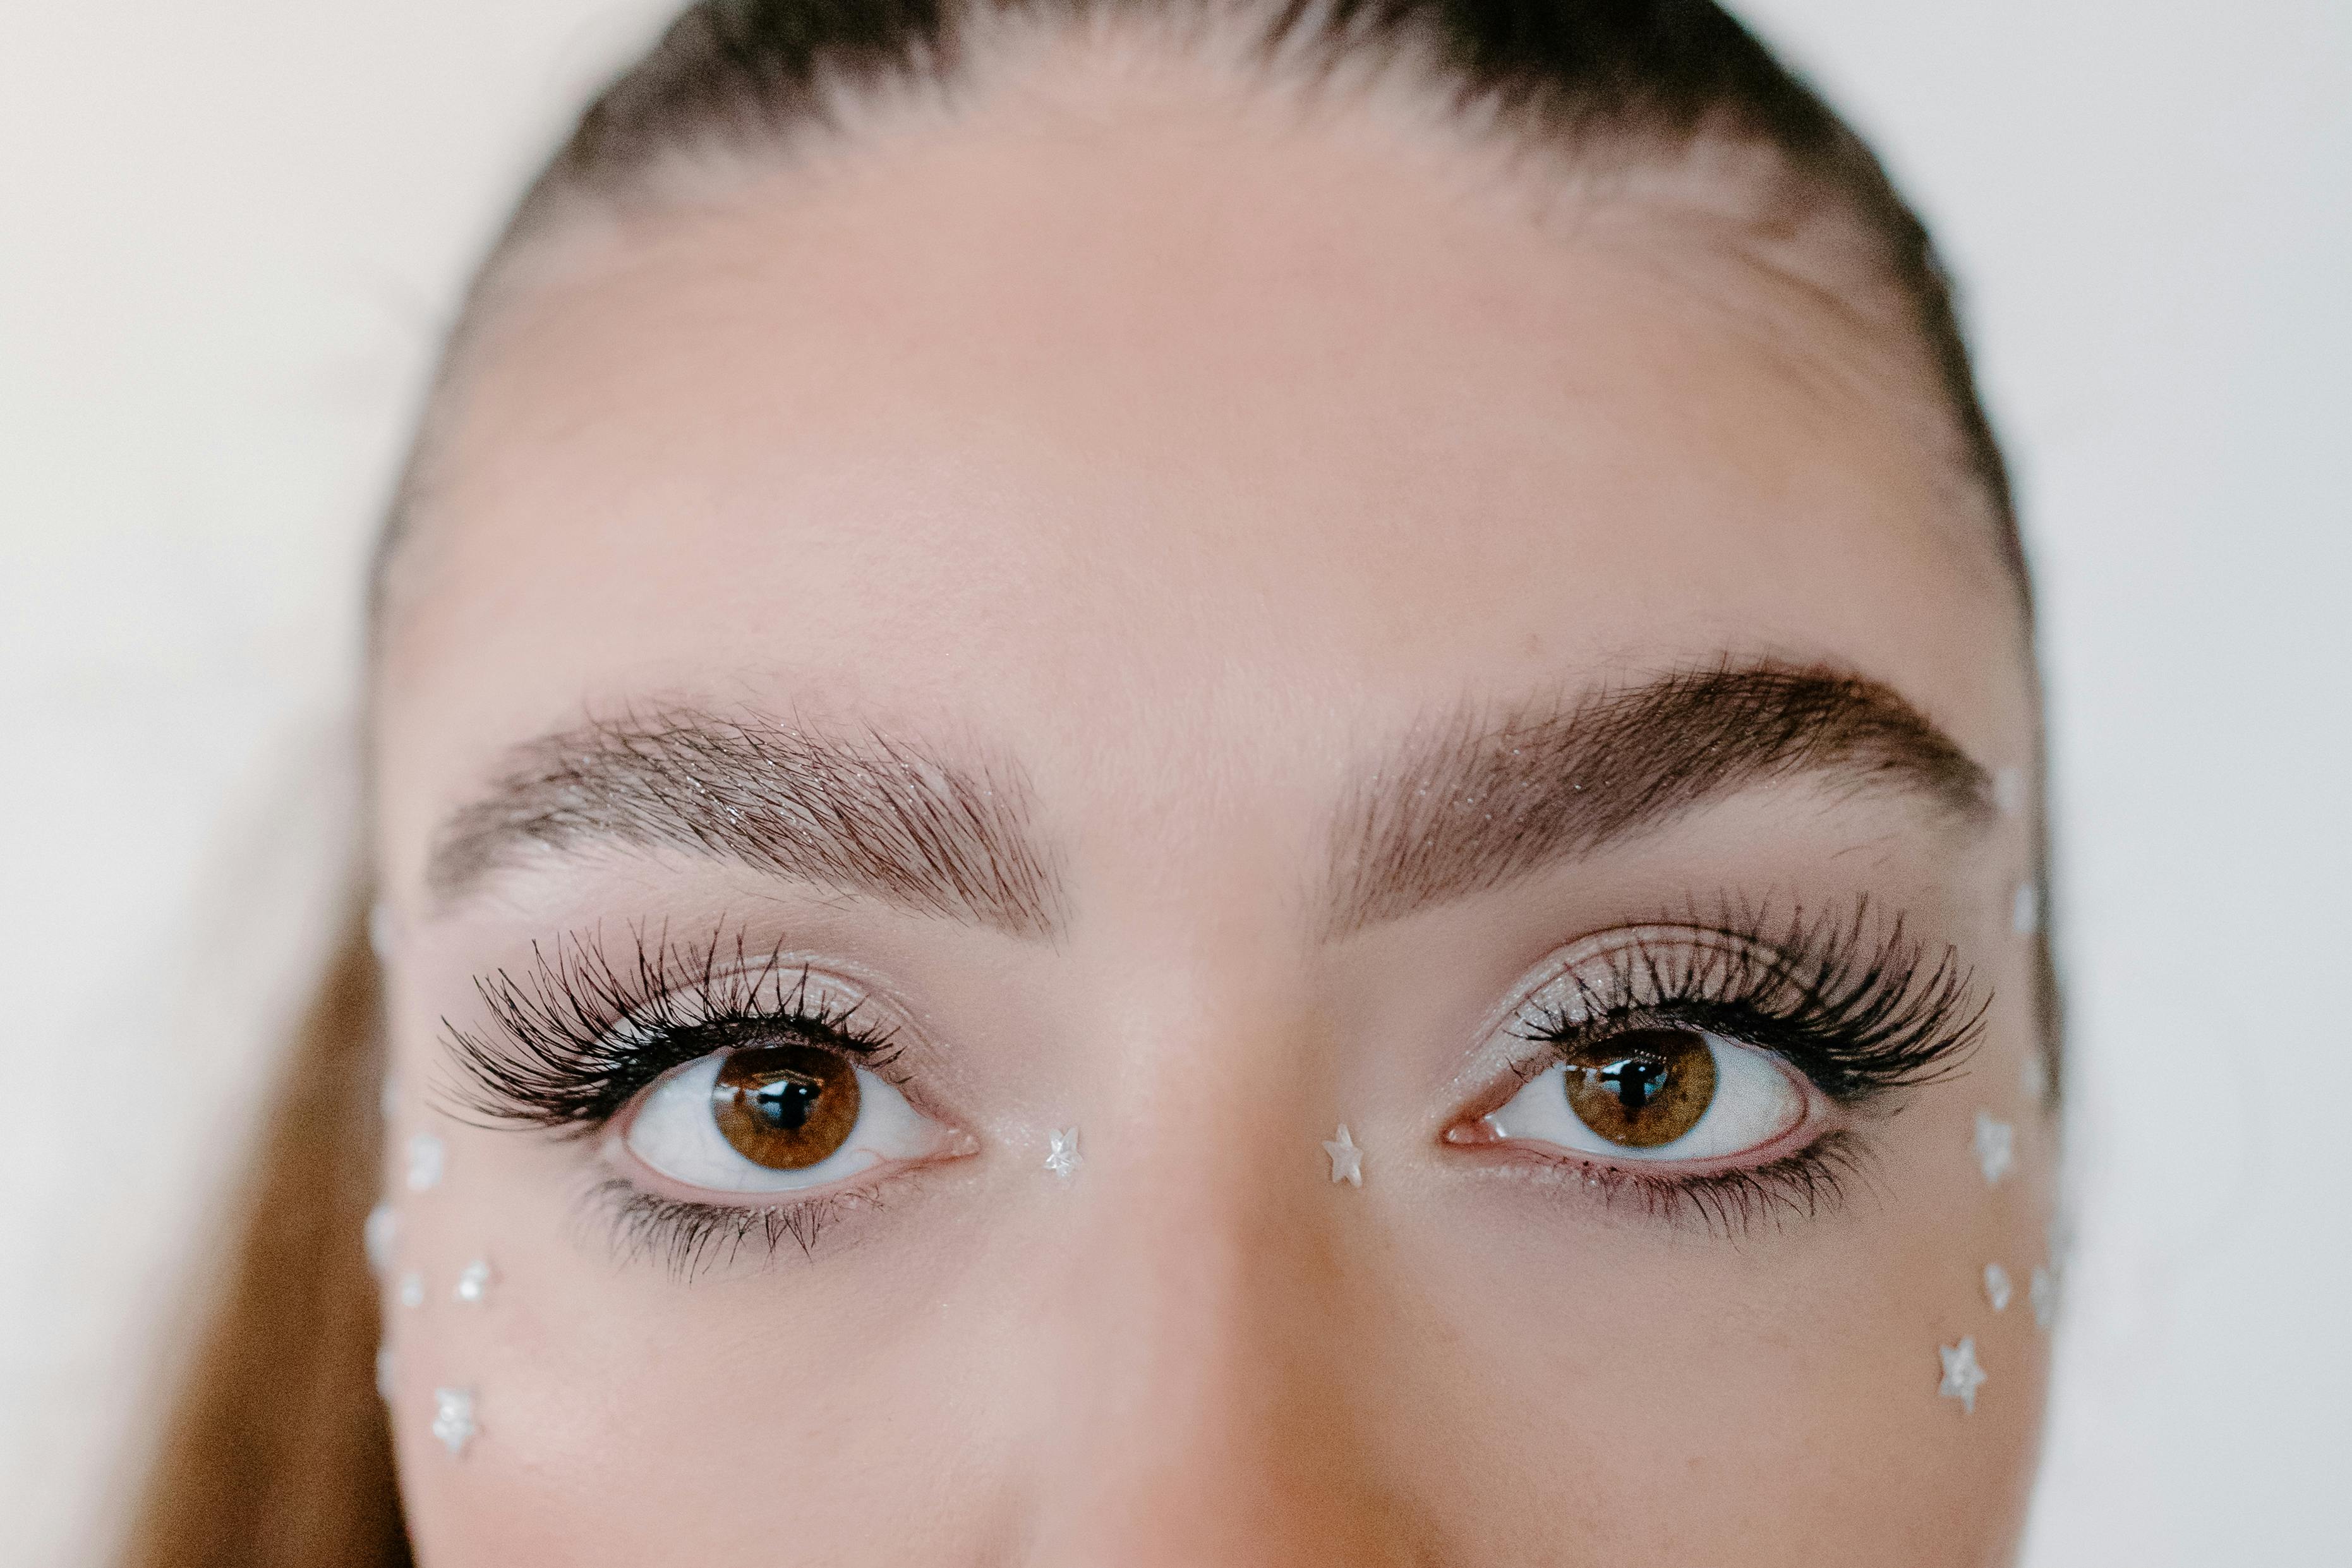 Is the UV lash system safe for lash extension or skin? It is here